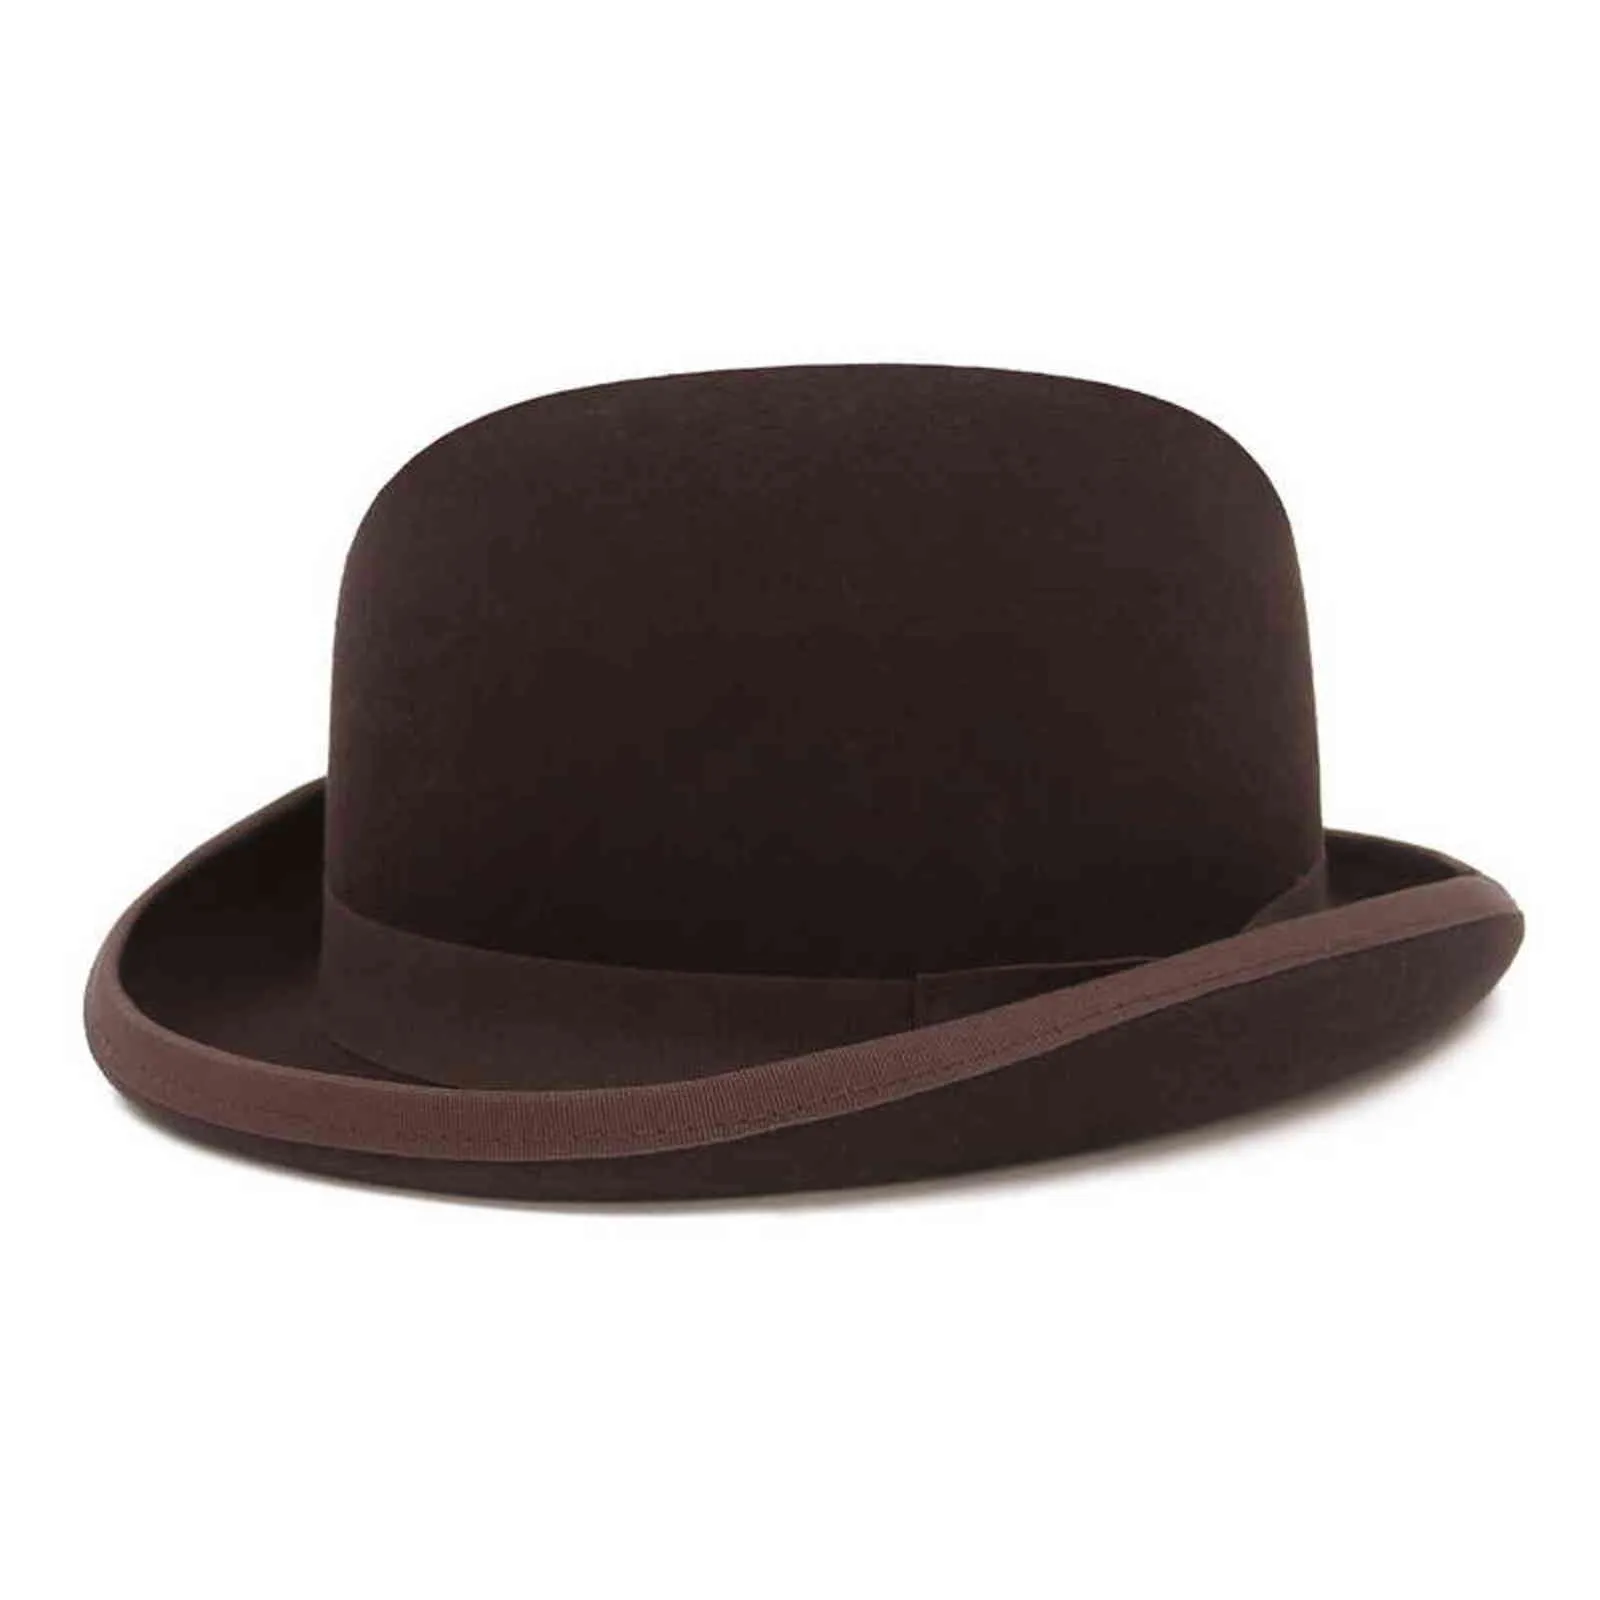 Gemvie 4 Colours 100 Wool Feel Derby Bowler Hat for Men Satin Woled Fashion Party Formin Fedora Costume Magician Hat Y11188334607